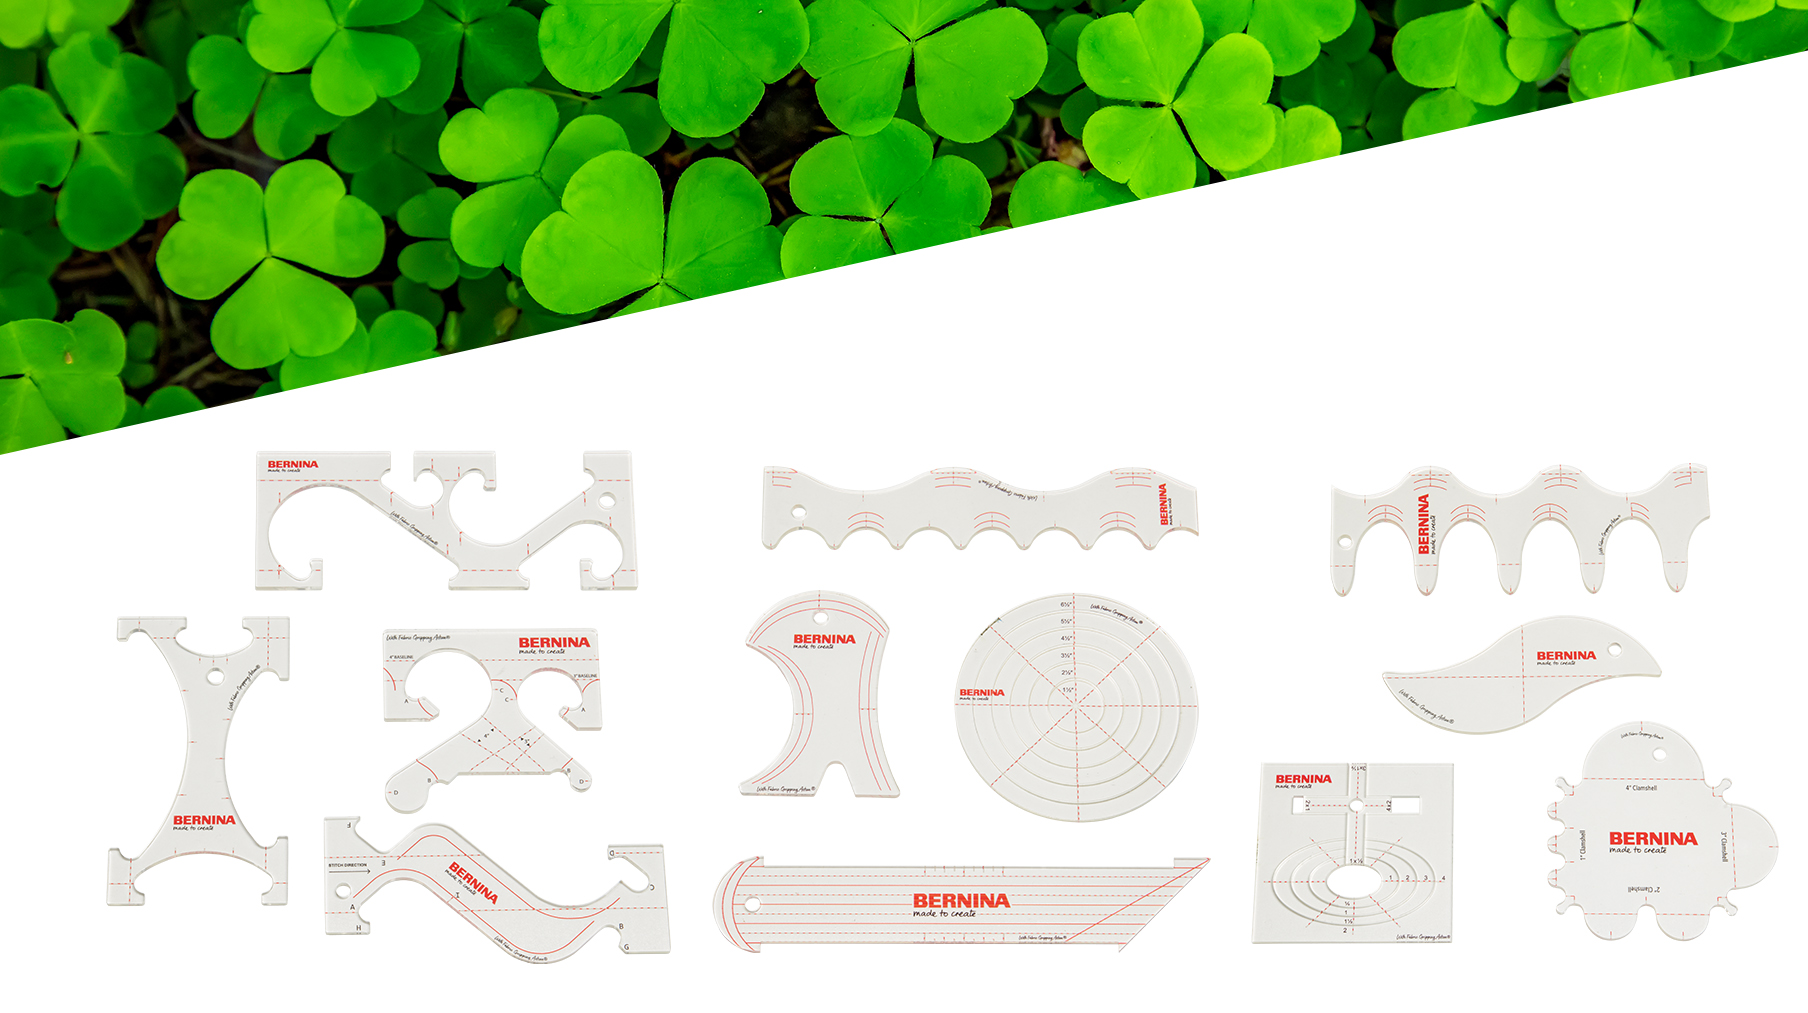 Accessory of the month, 20% Off BERNINA Ruler Kit Sets